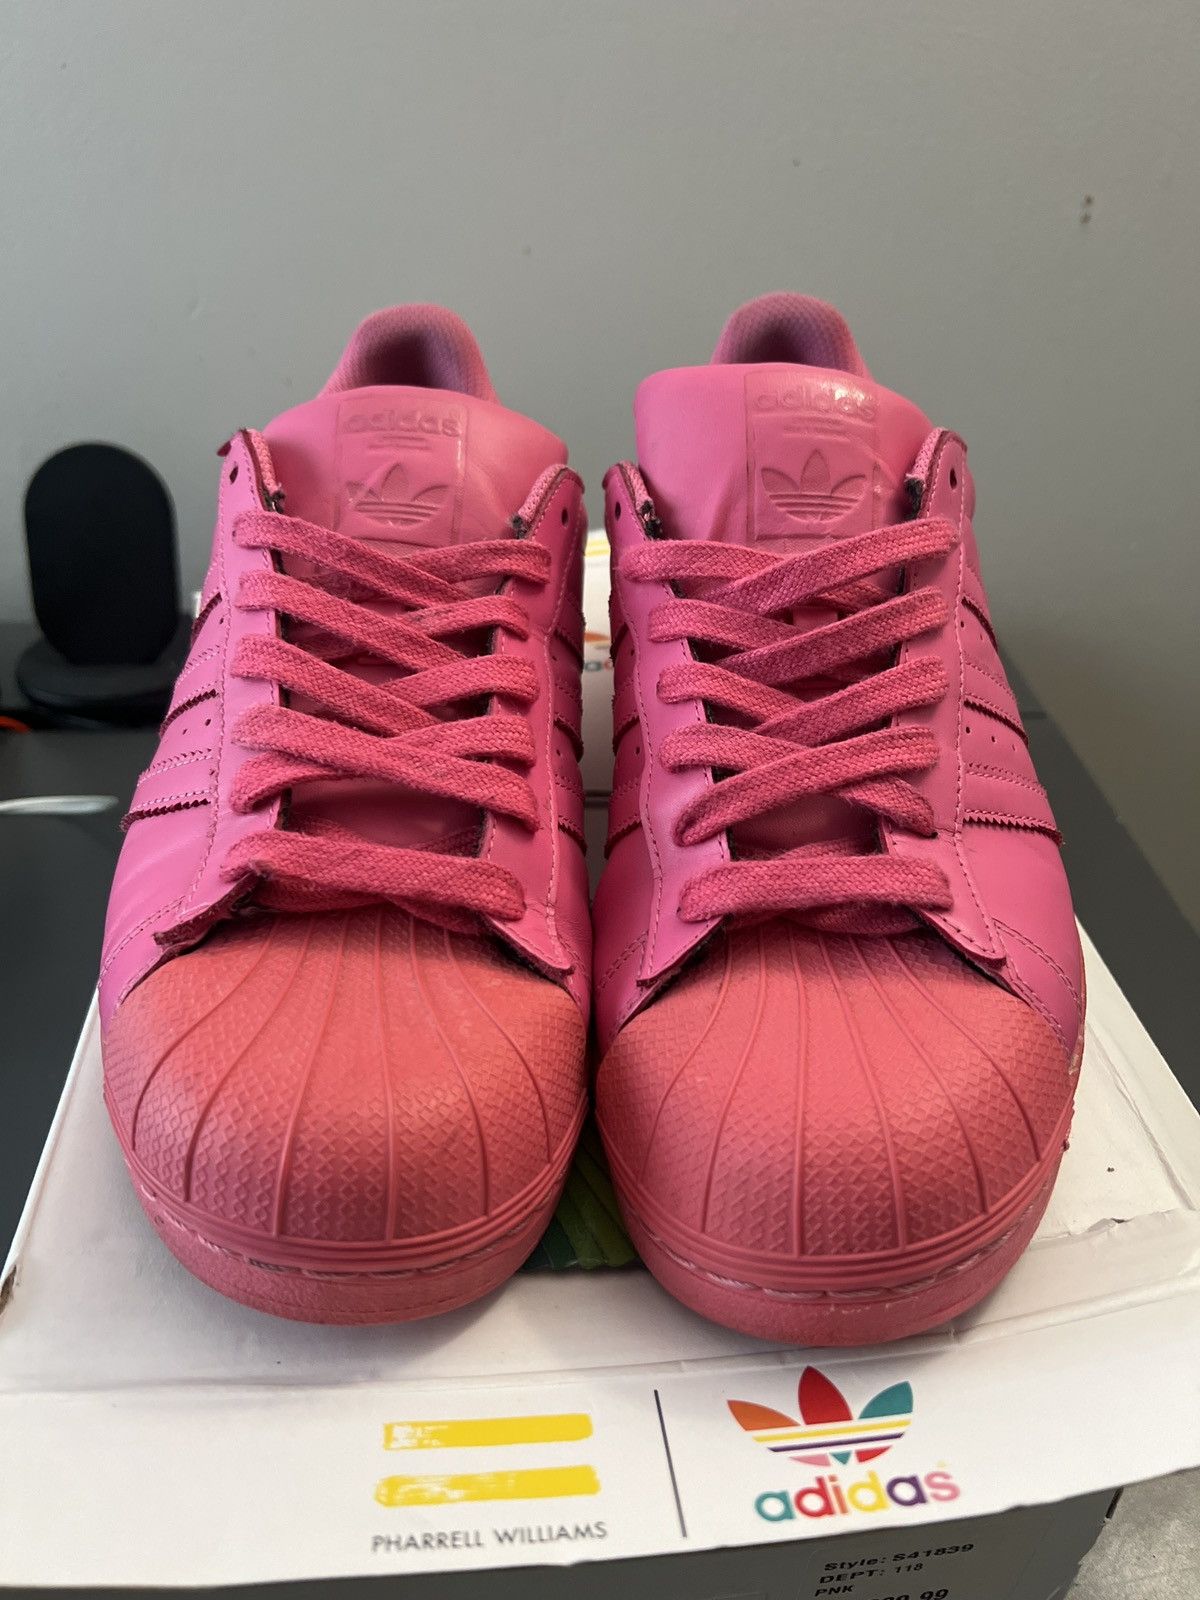 New Adidas Pink Superstar Supercolor Pack Pharrell Williams